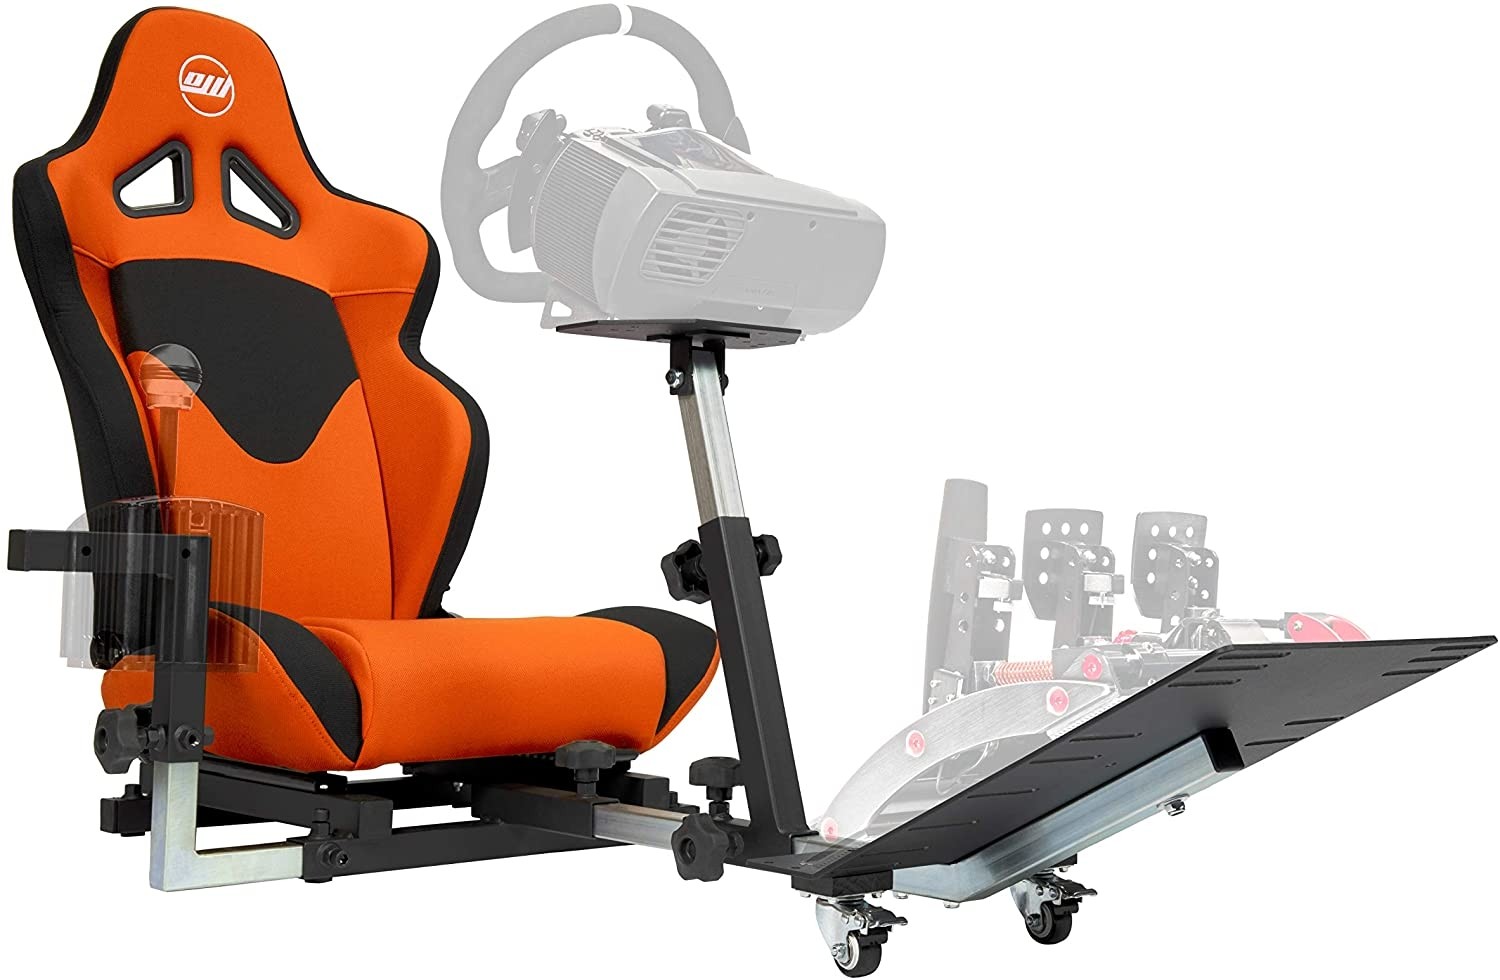 Racing Gaming Seat With Steering Wheel And Pedal Slots 